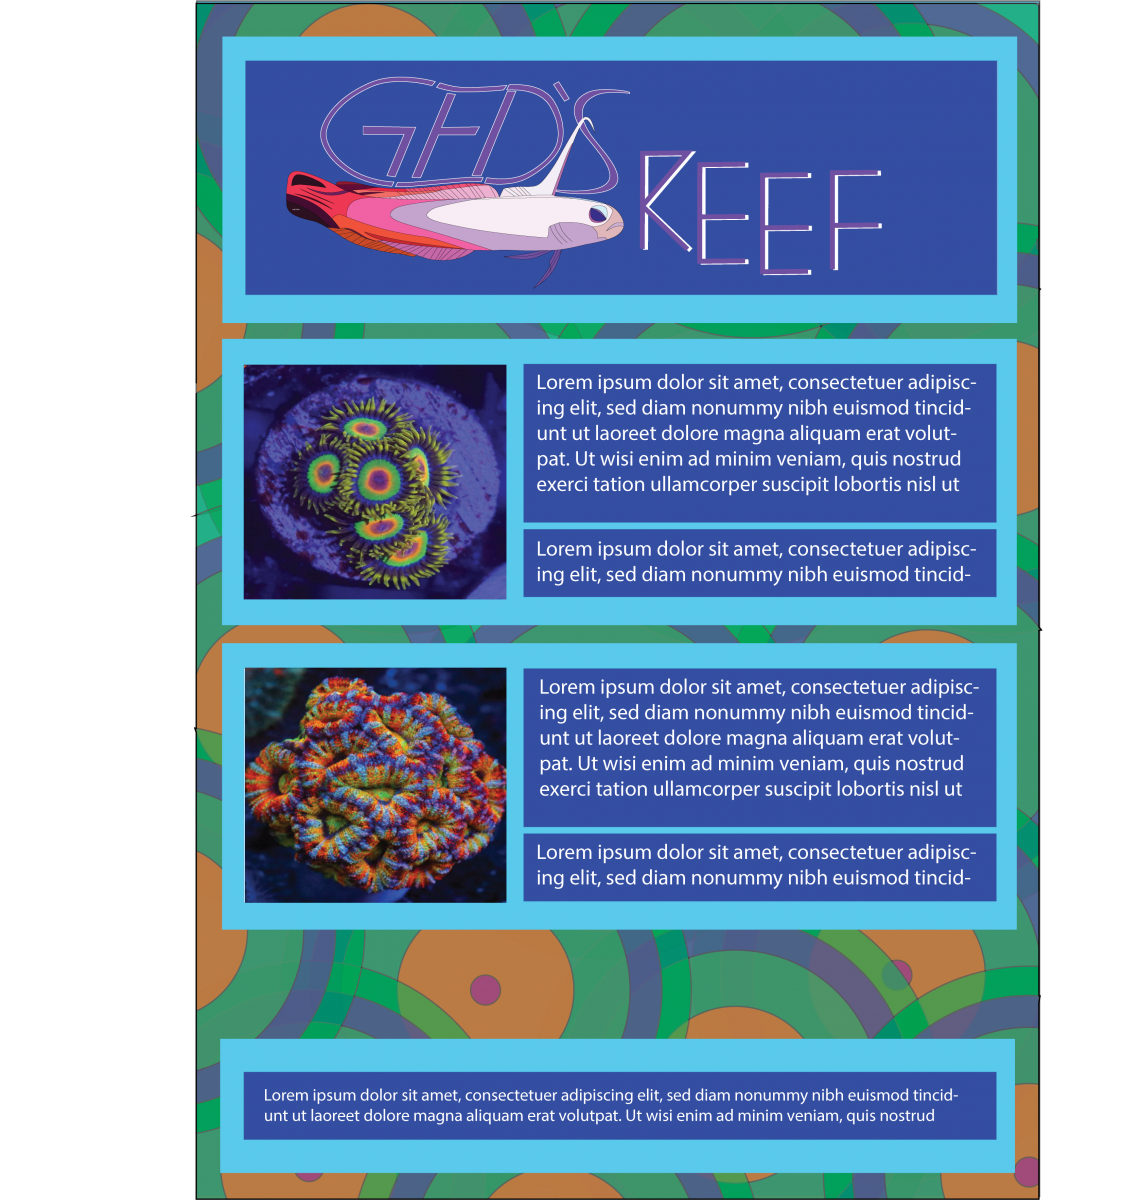 geds reef web layout.png